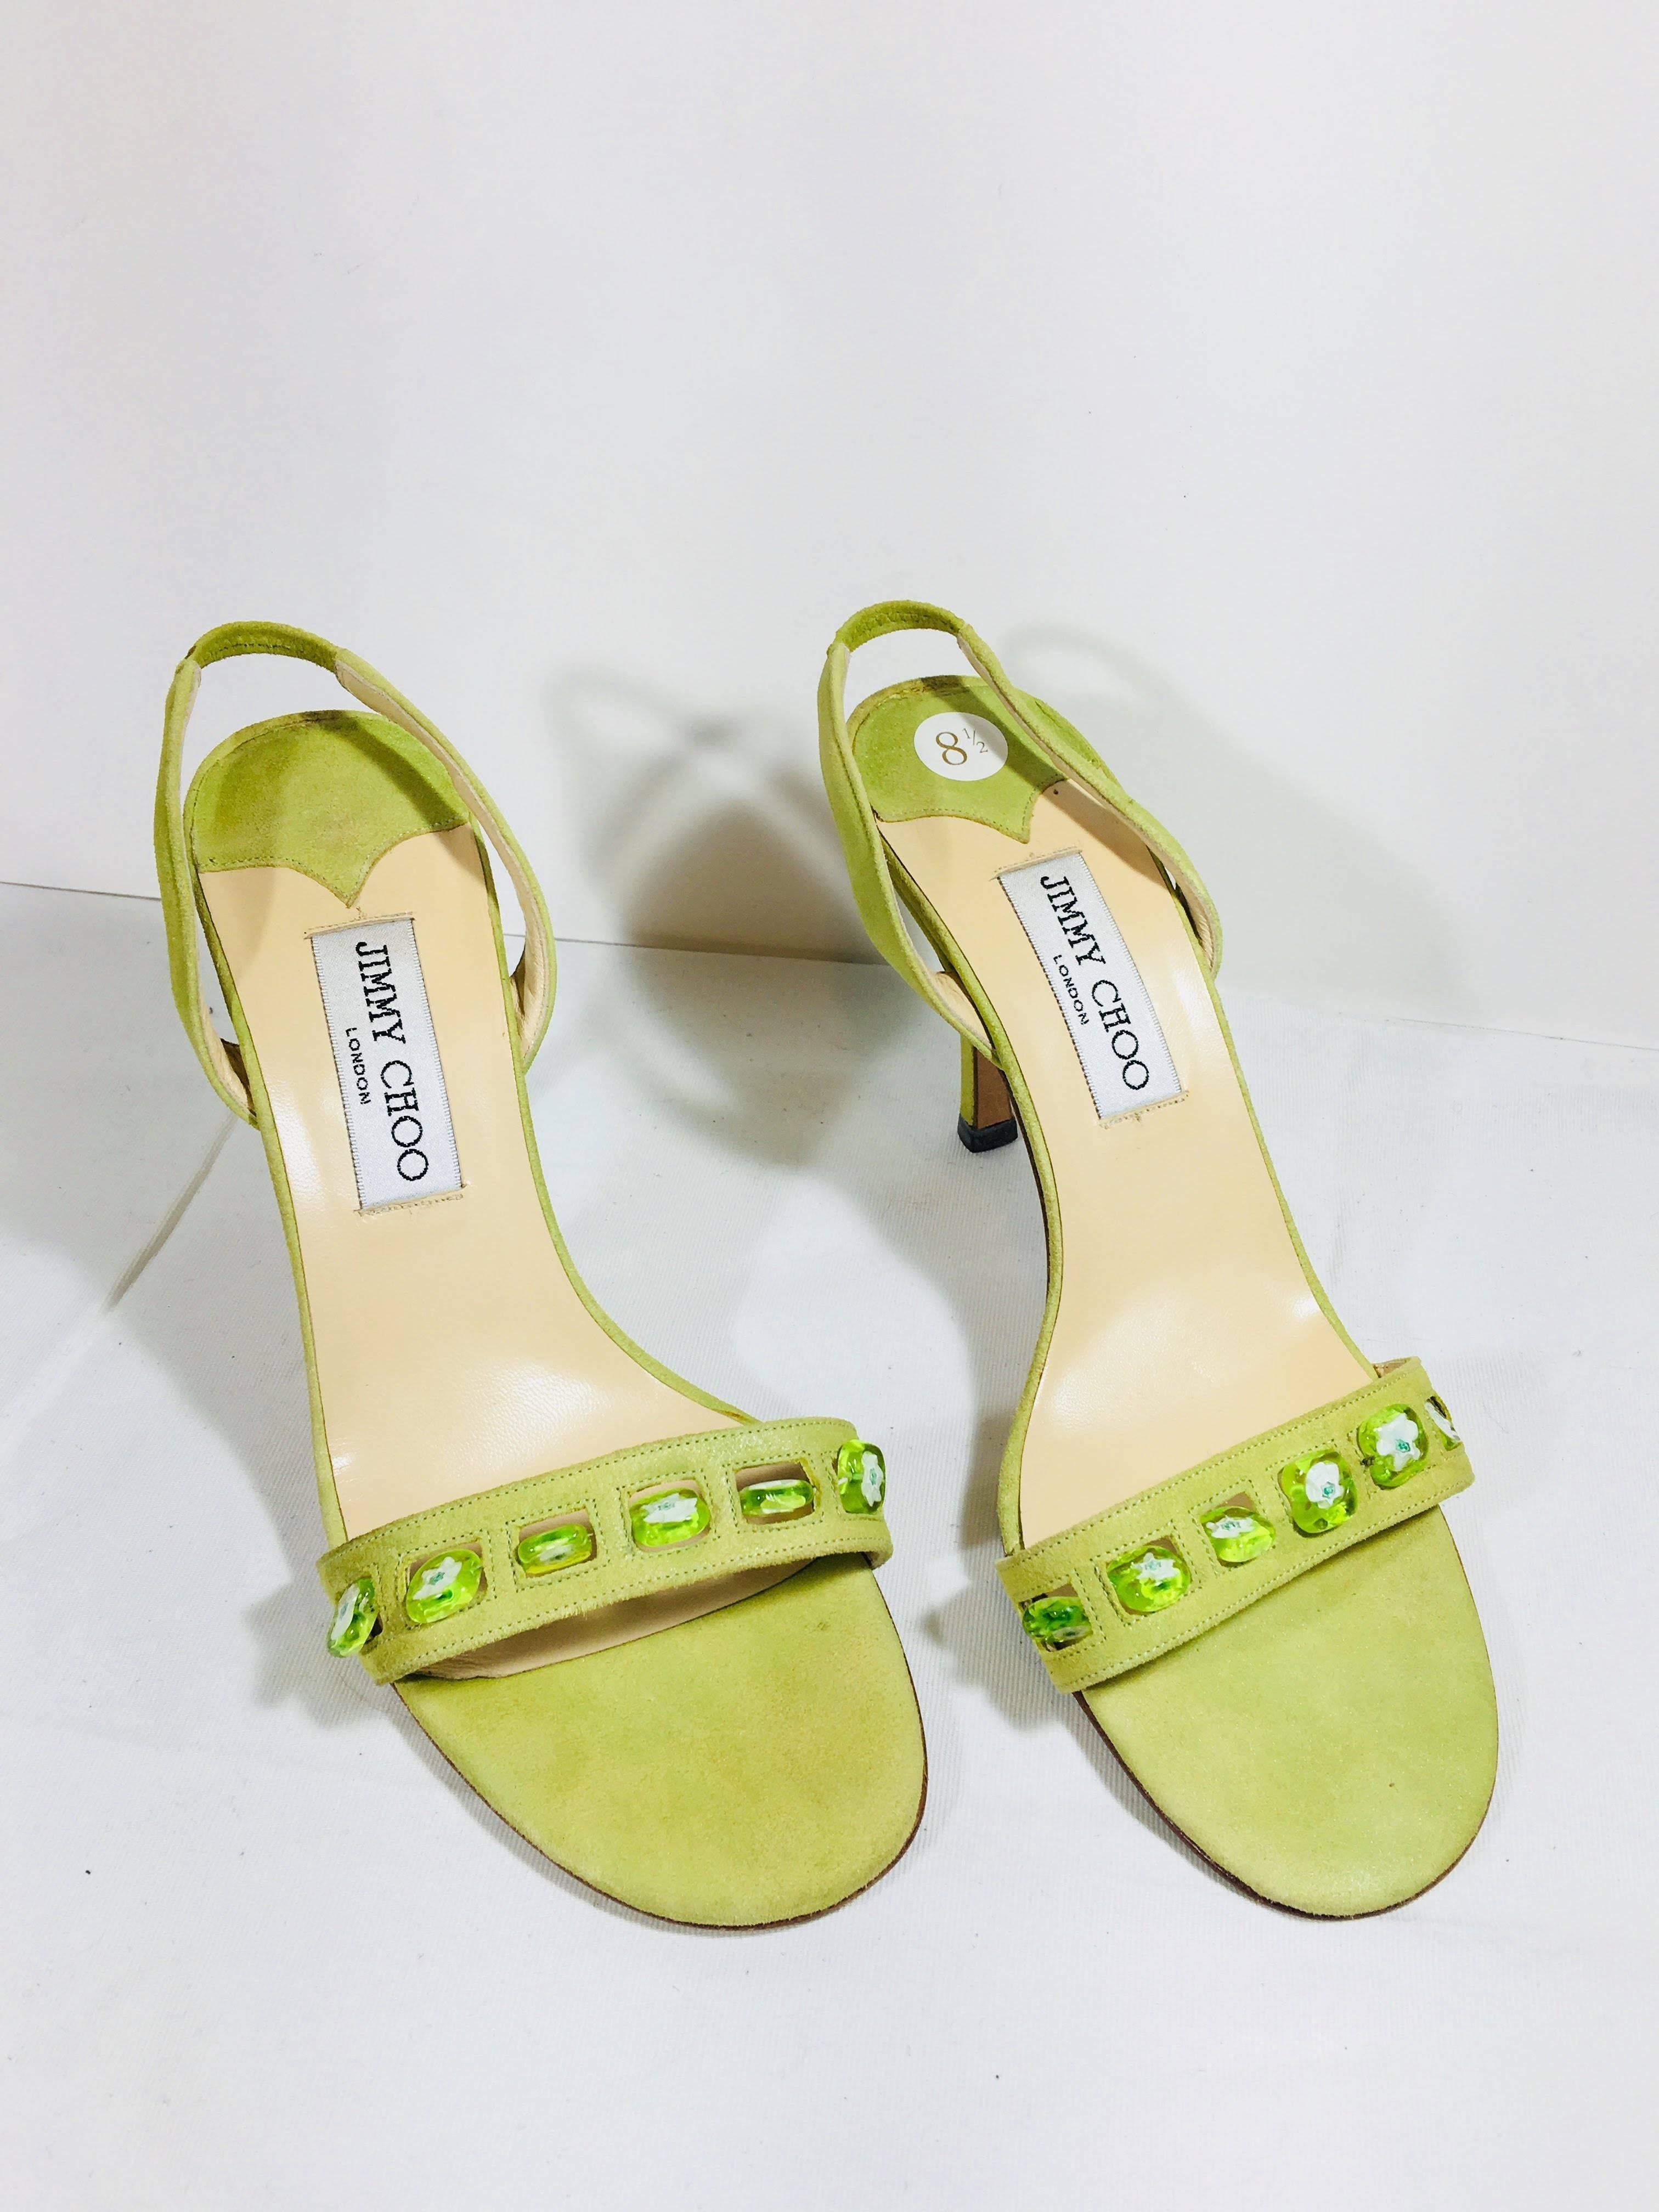 Jimmy Choo Slingback Pumps with Open Toe in Lime Green Suede and Beaded Detail.